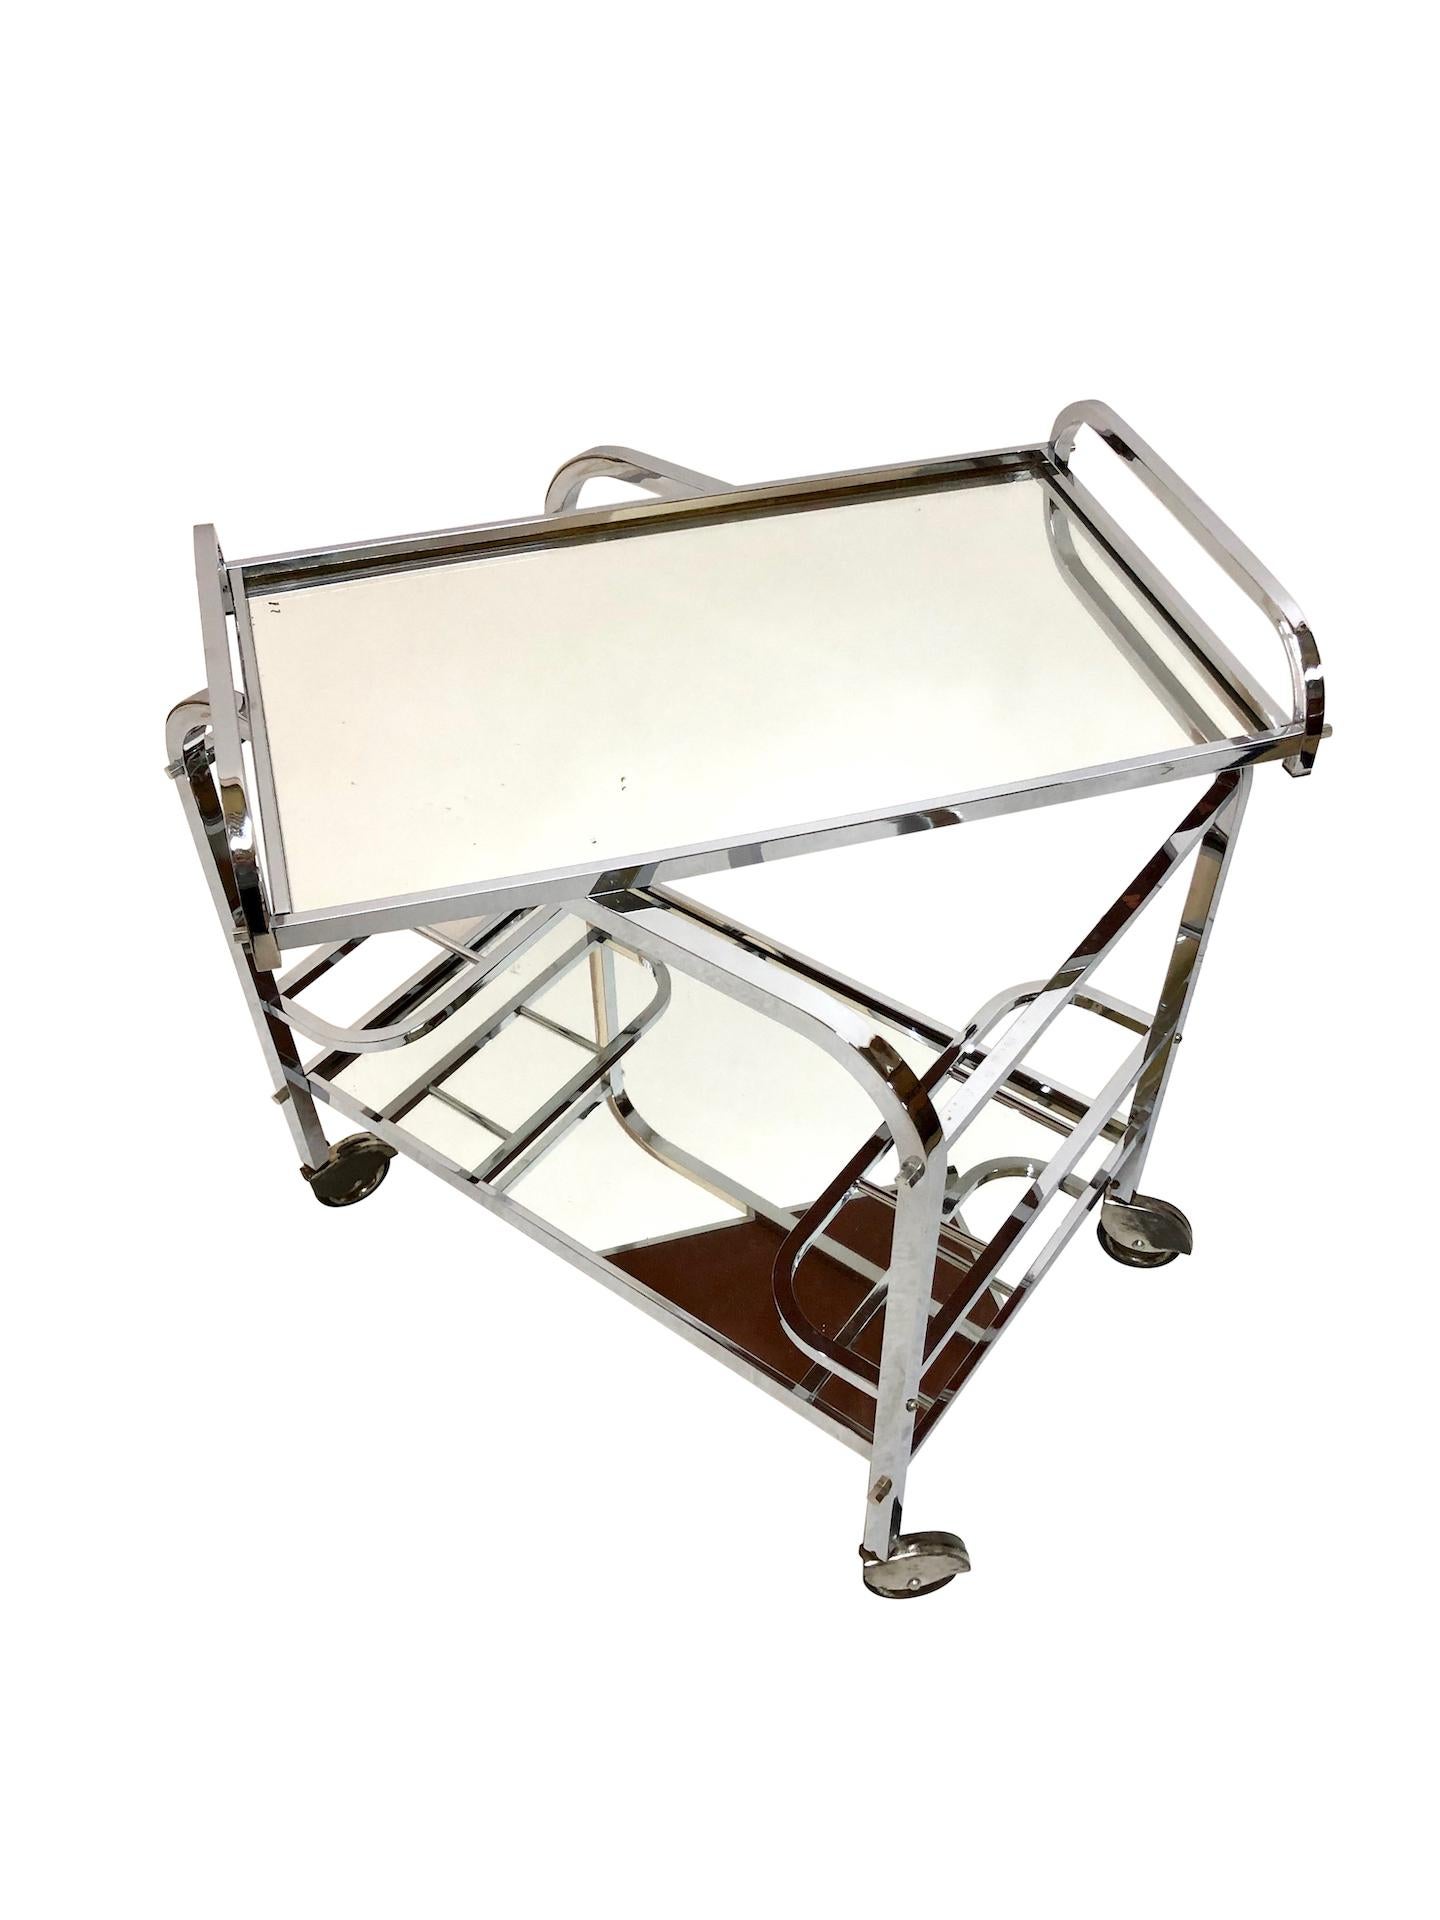 Modernistic Art Deco bar trolley or tea wagon
Original chrome and mirrors 
Removable tray 
French Art Deco, 1930s 

Pictures take in a warm lighted ambience. 
Surface is chromed!